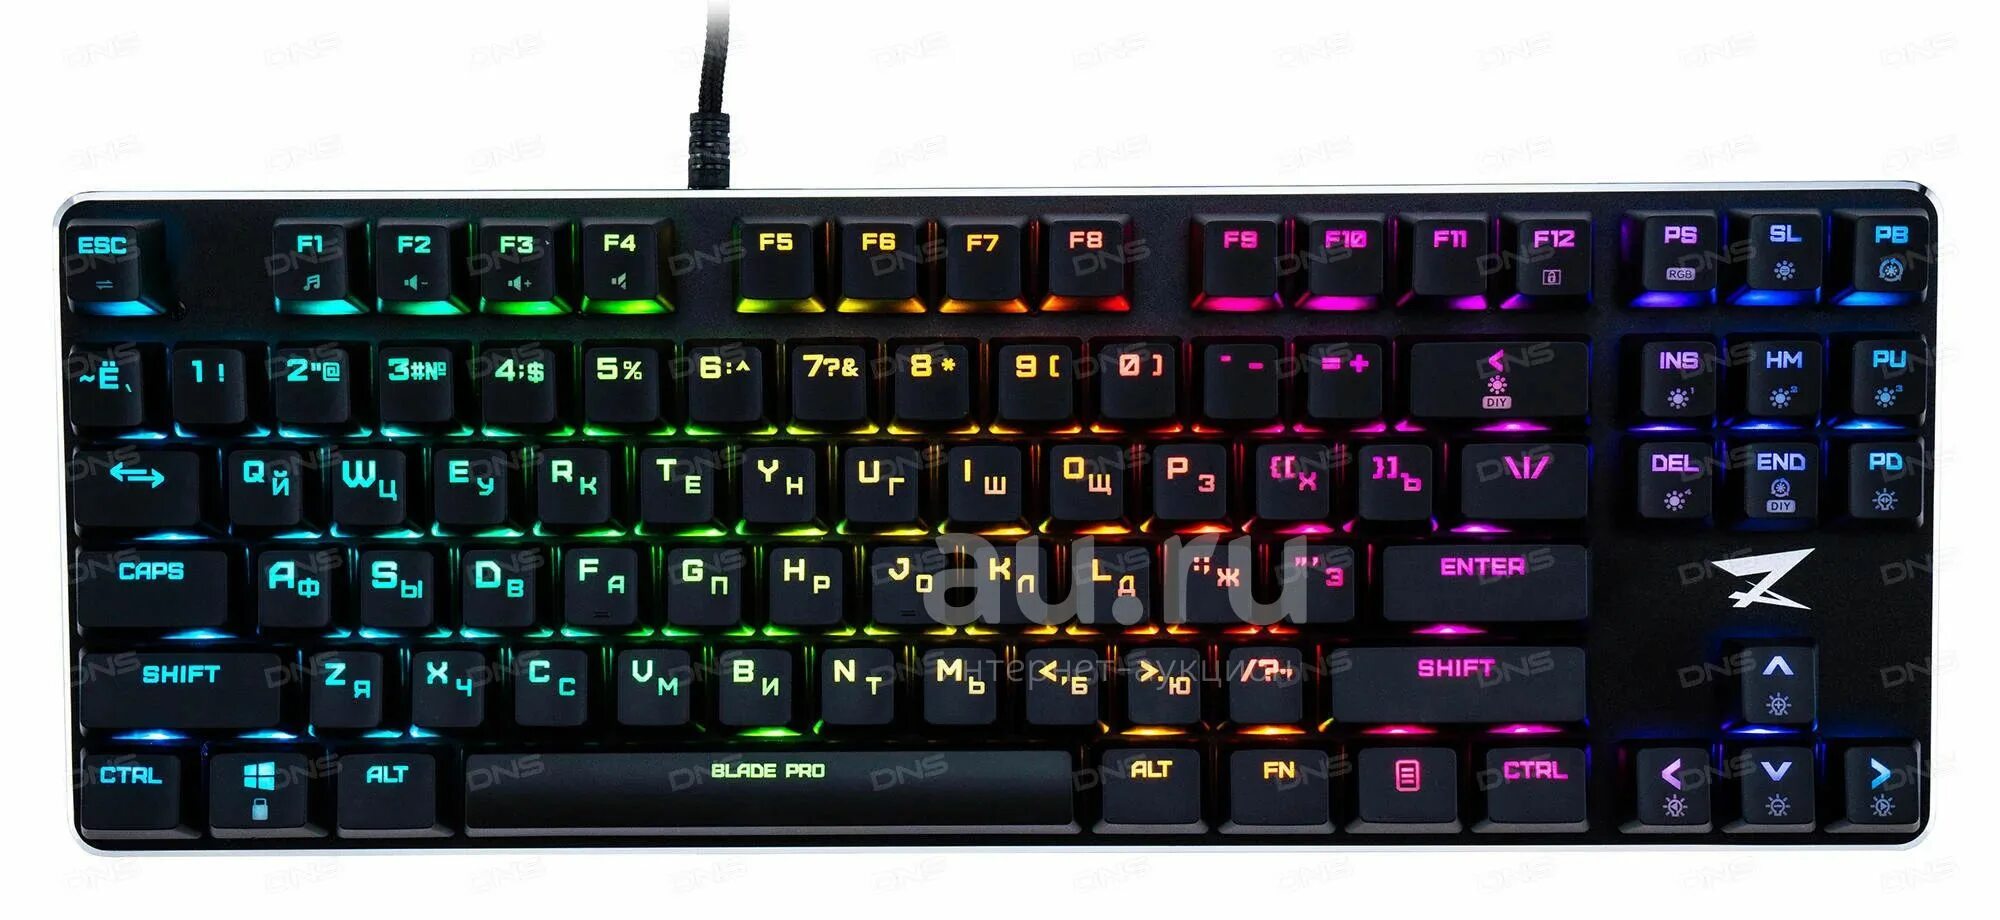 Zet gaming kailh red. Клавиатура zet Blade k180. Клавиатура zet Blade Pro Kailh Red. Клавиатура Blade zet механическая. Клавиатура Zed Blade Pro.